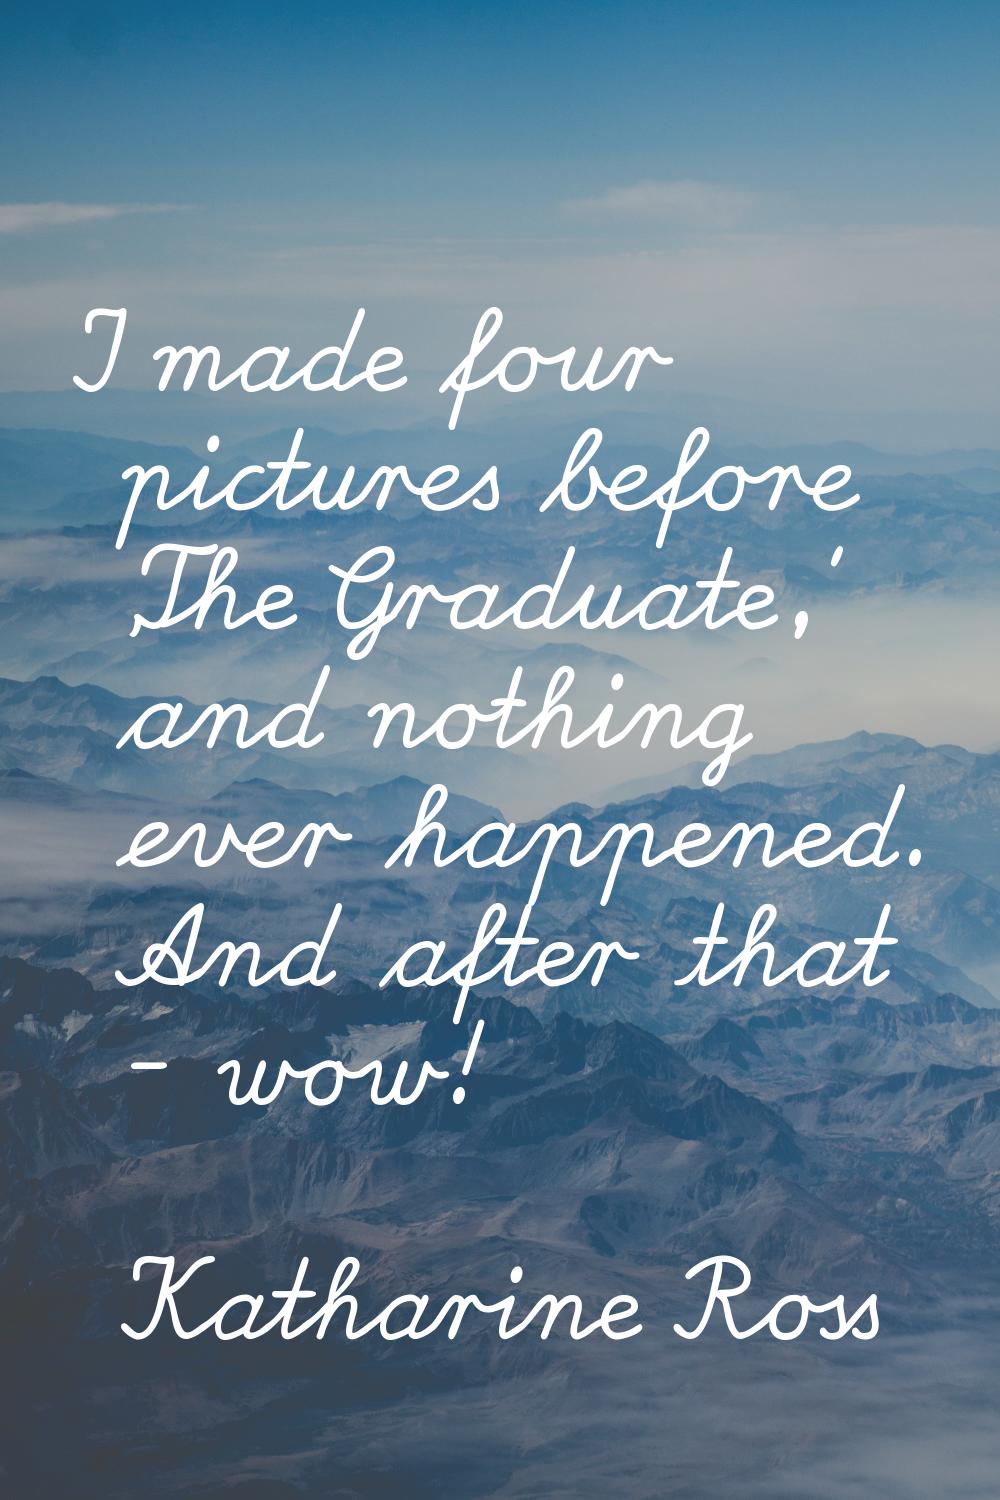 I made four pictures before 'The Graduate,' and nothing ever happened. And after that - wow!